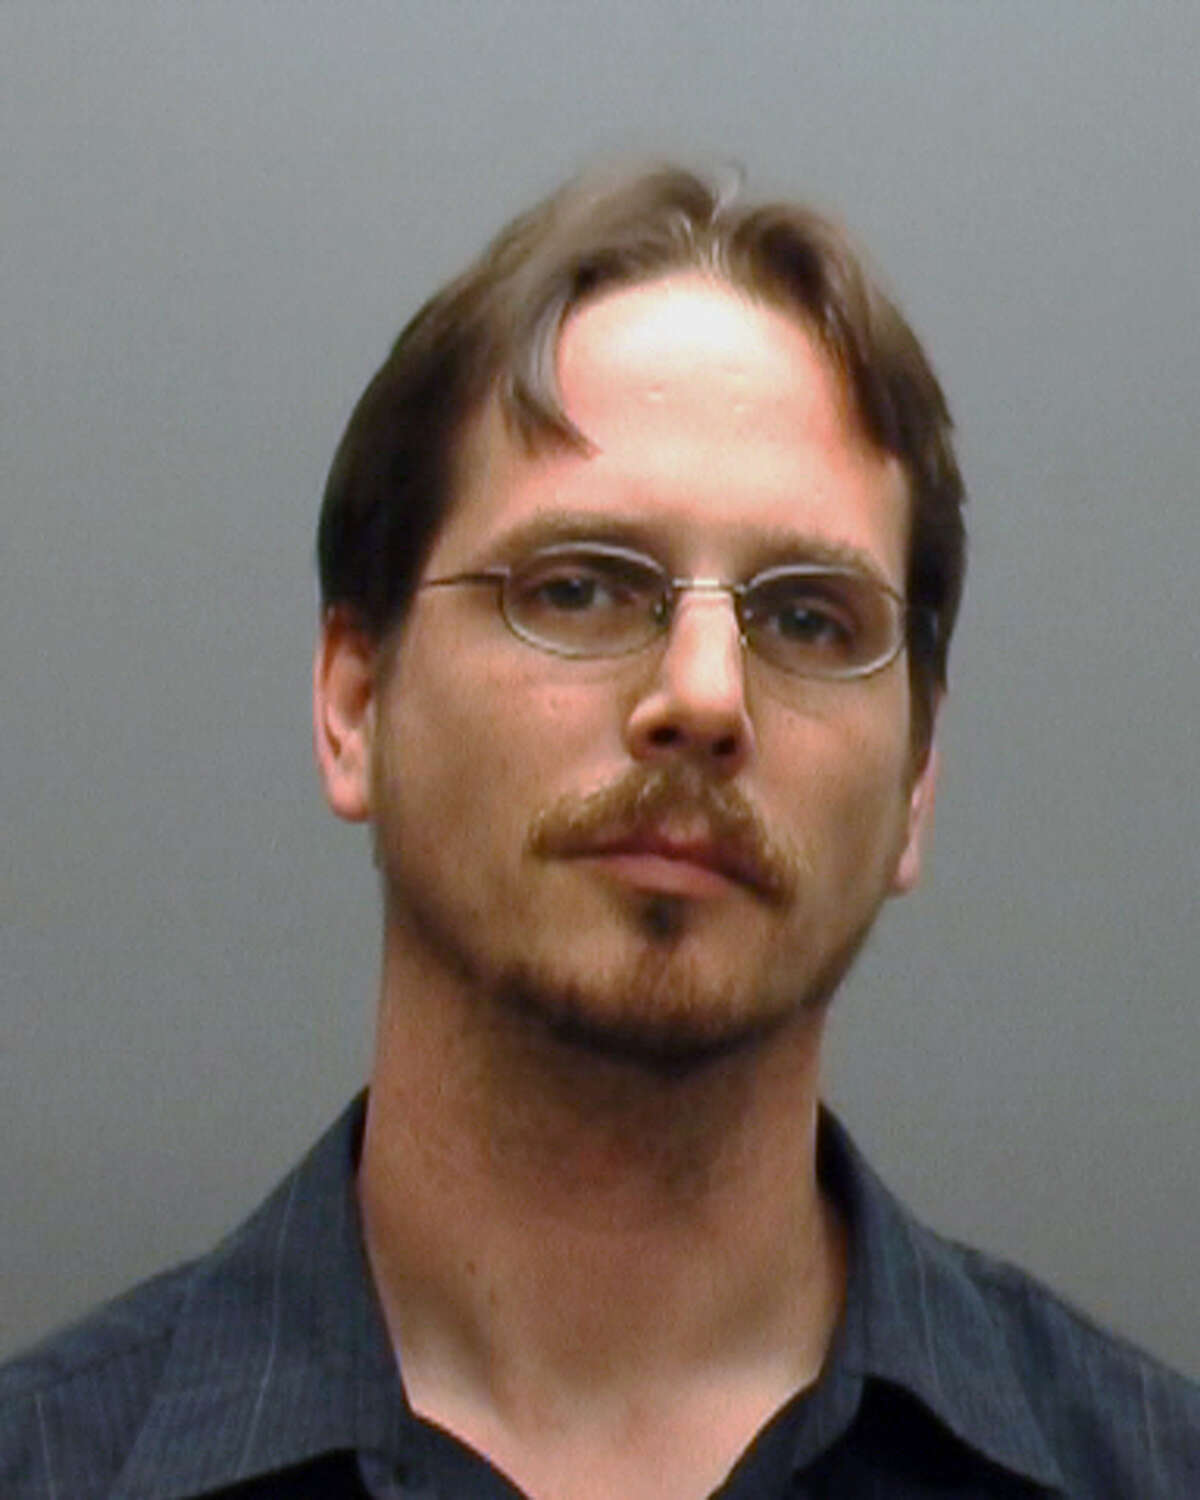 This booking photo provided by the Hays (Texas) County Sheriff shows Dane Thyssen. The Dripping Springs Police say Thyssen and his wife, Jenifer Thyssen kept their adopted son, 22-year-old Koystya Thyssen locked in a garage apartment for at least four years, periodically giving him a box of food and allowing him to leave once a week. Police began investigating when Koystya Thyssen was arrested for allegedly burglarizing a neighbor's home. (AP Photos/Hays County Sheriff)